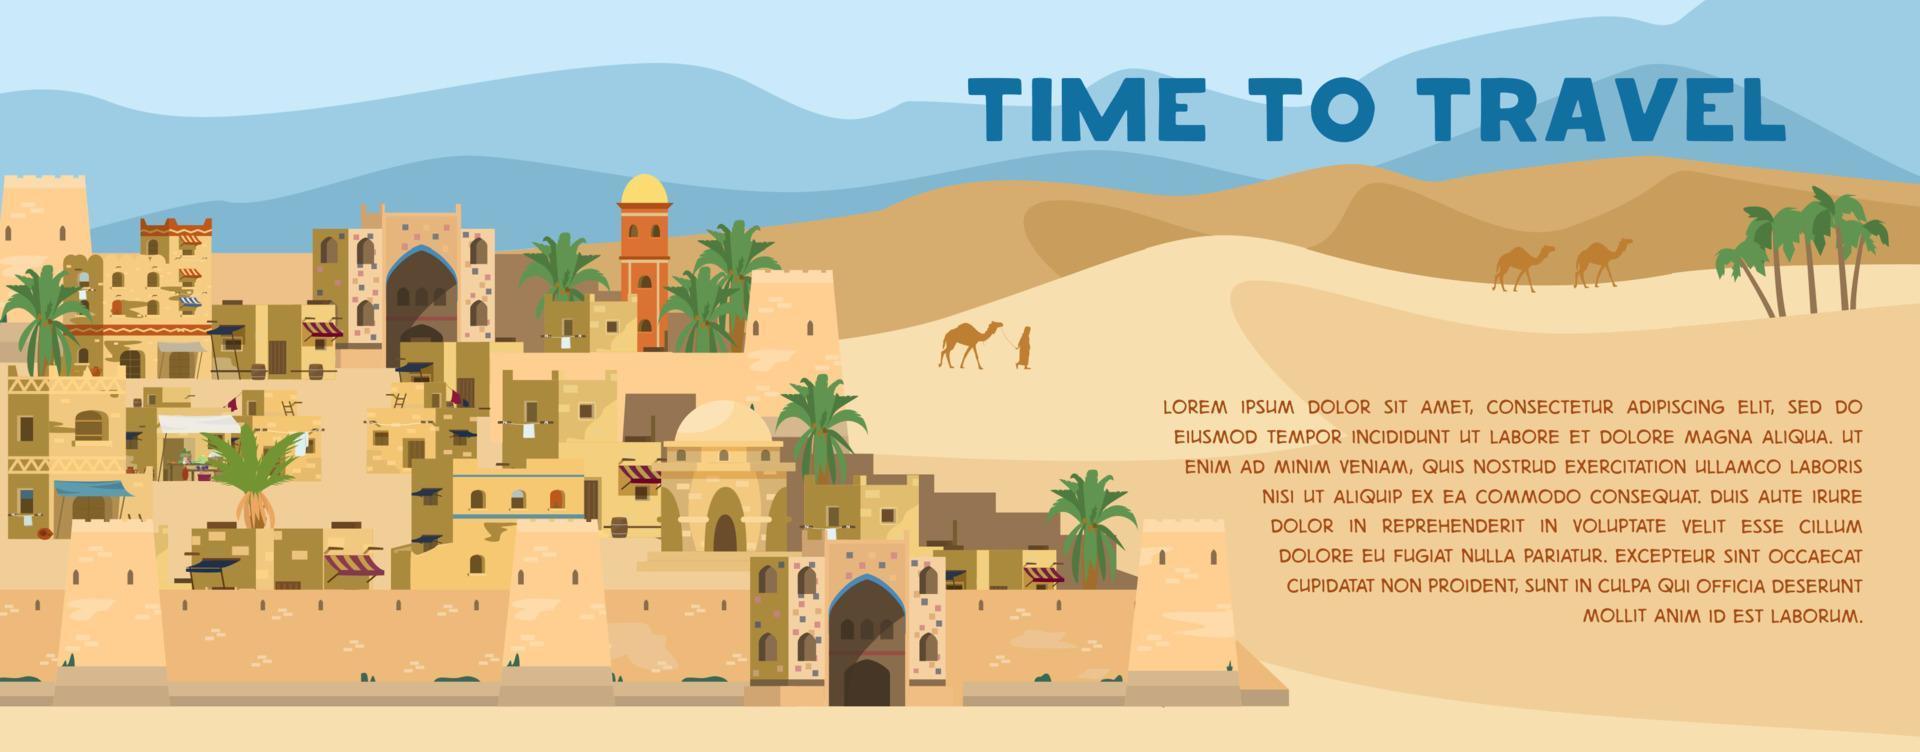 Time To Travel Vector Banner With illustration of Ancient Arabic Town In desert landscape with traditional mud brick houses, palms, camels.  Flat Design.